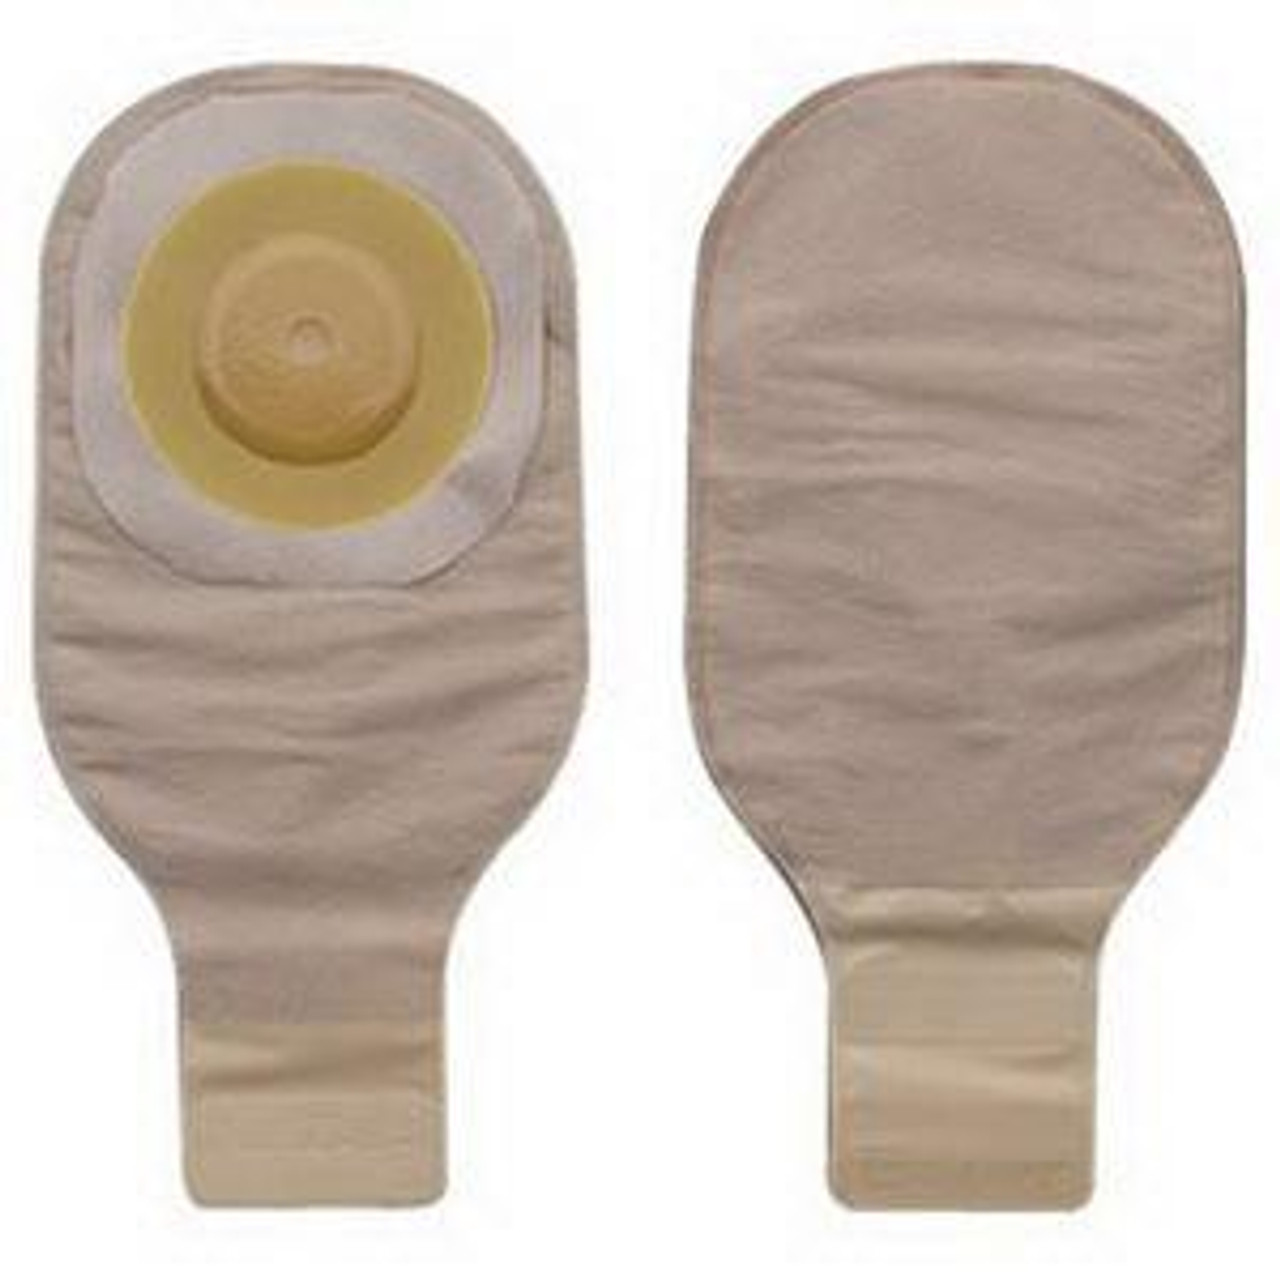 CONVEX Drainable Pouch, CUT-TO-FIT 2", BEIGE, LOCK-N-ROLL BX/5 (HOL-85011) (Hollister 85011)